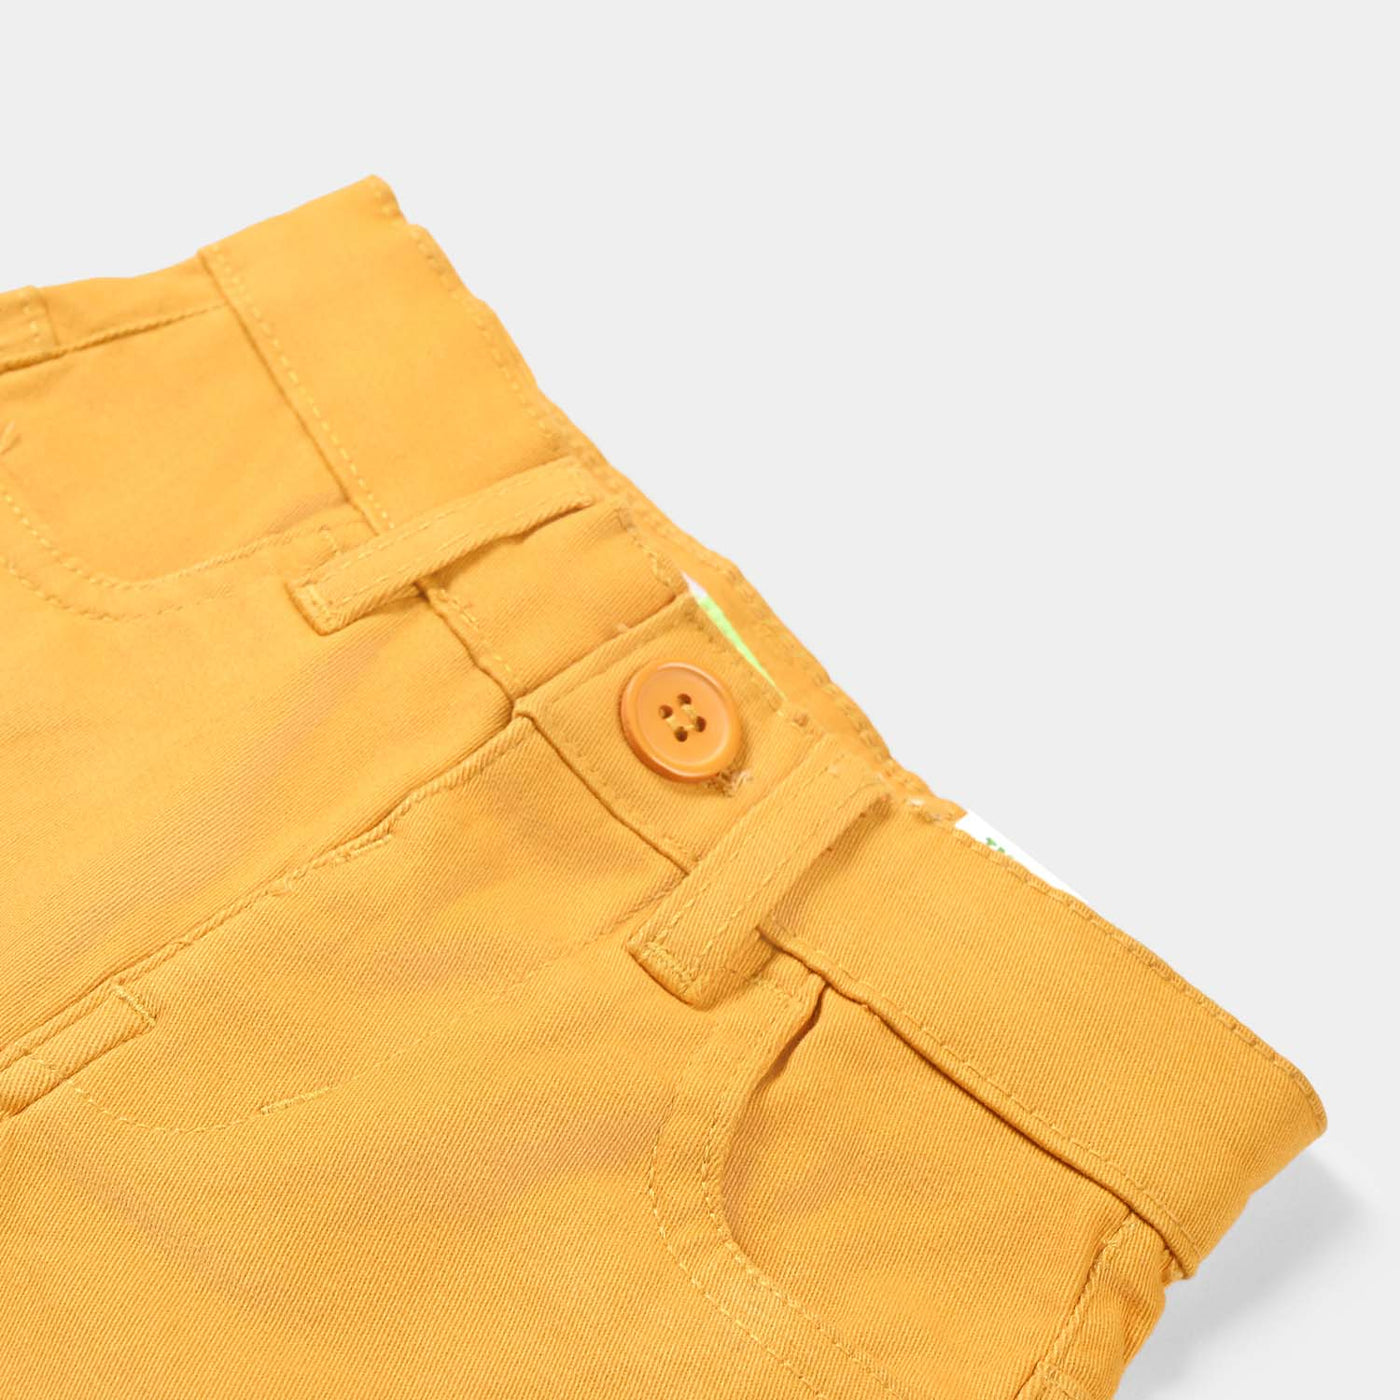 Infant Boys Cotton Twill Short Characters